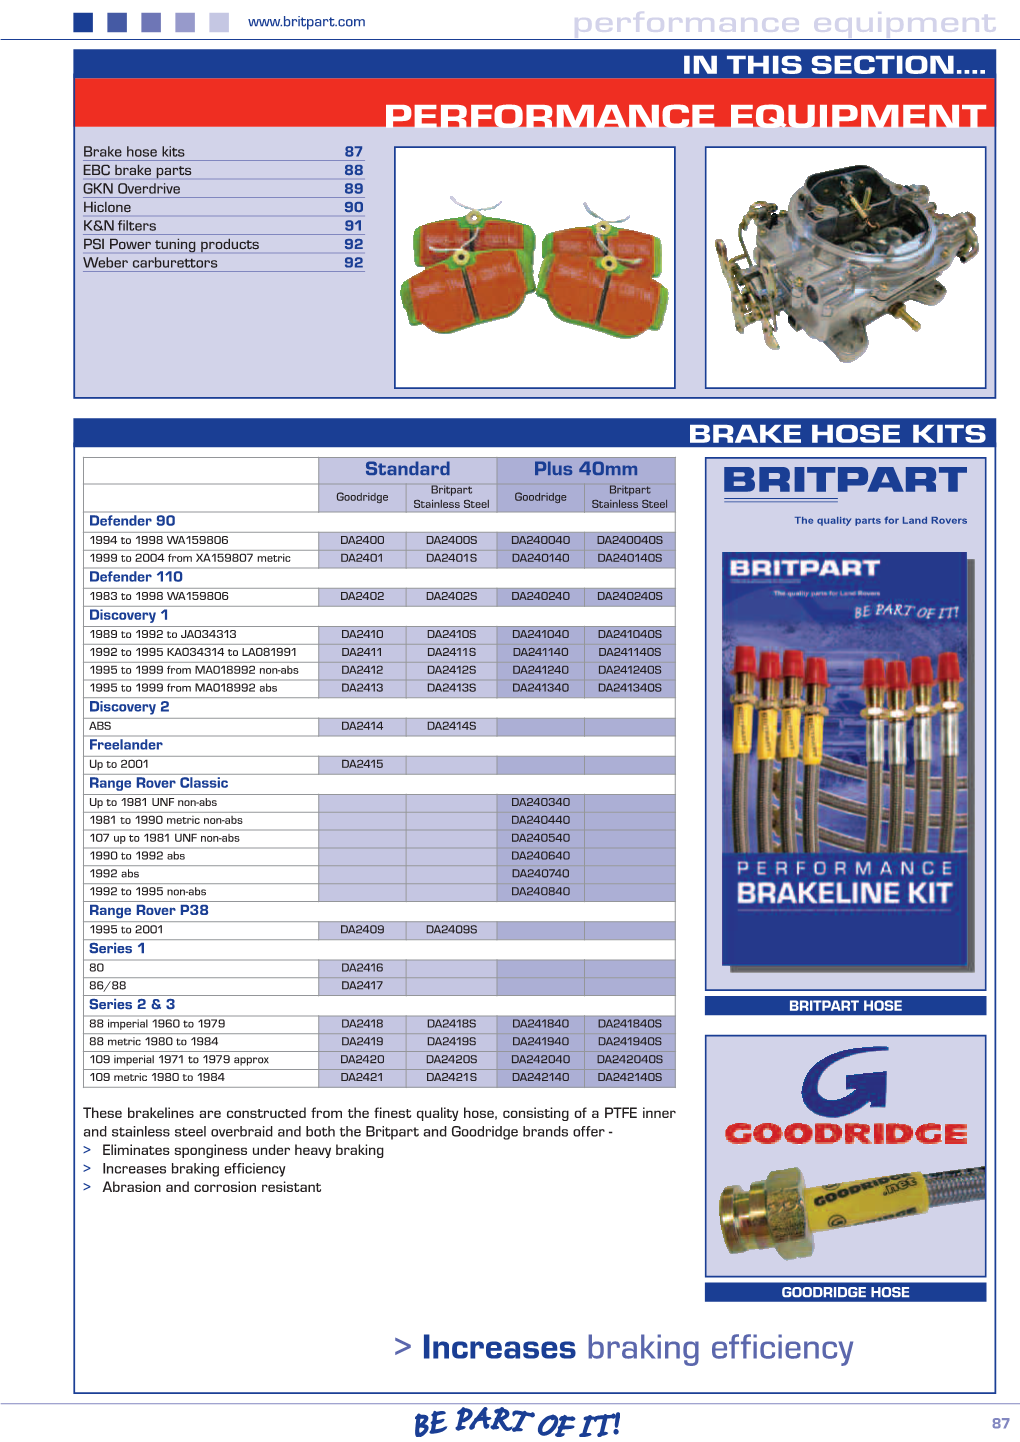 Increases Braking Efficiency > Abrasion and Corrosion Resistant